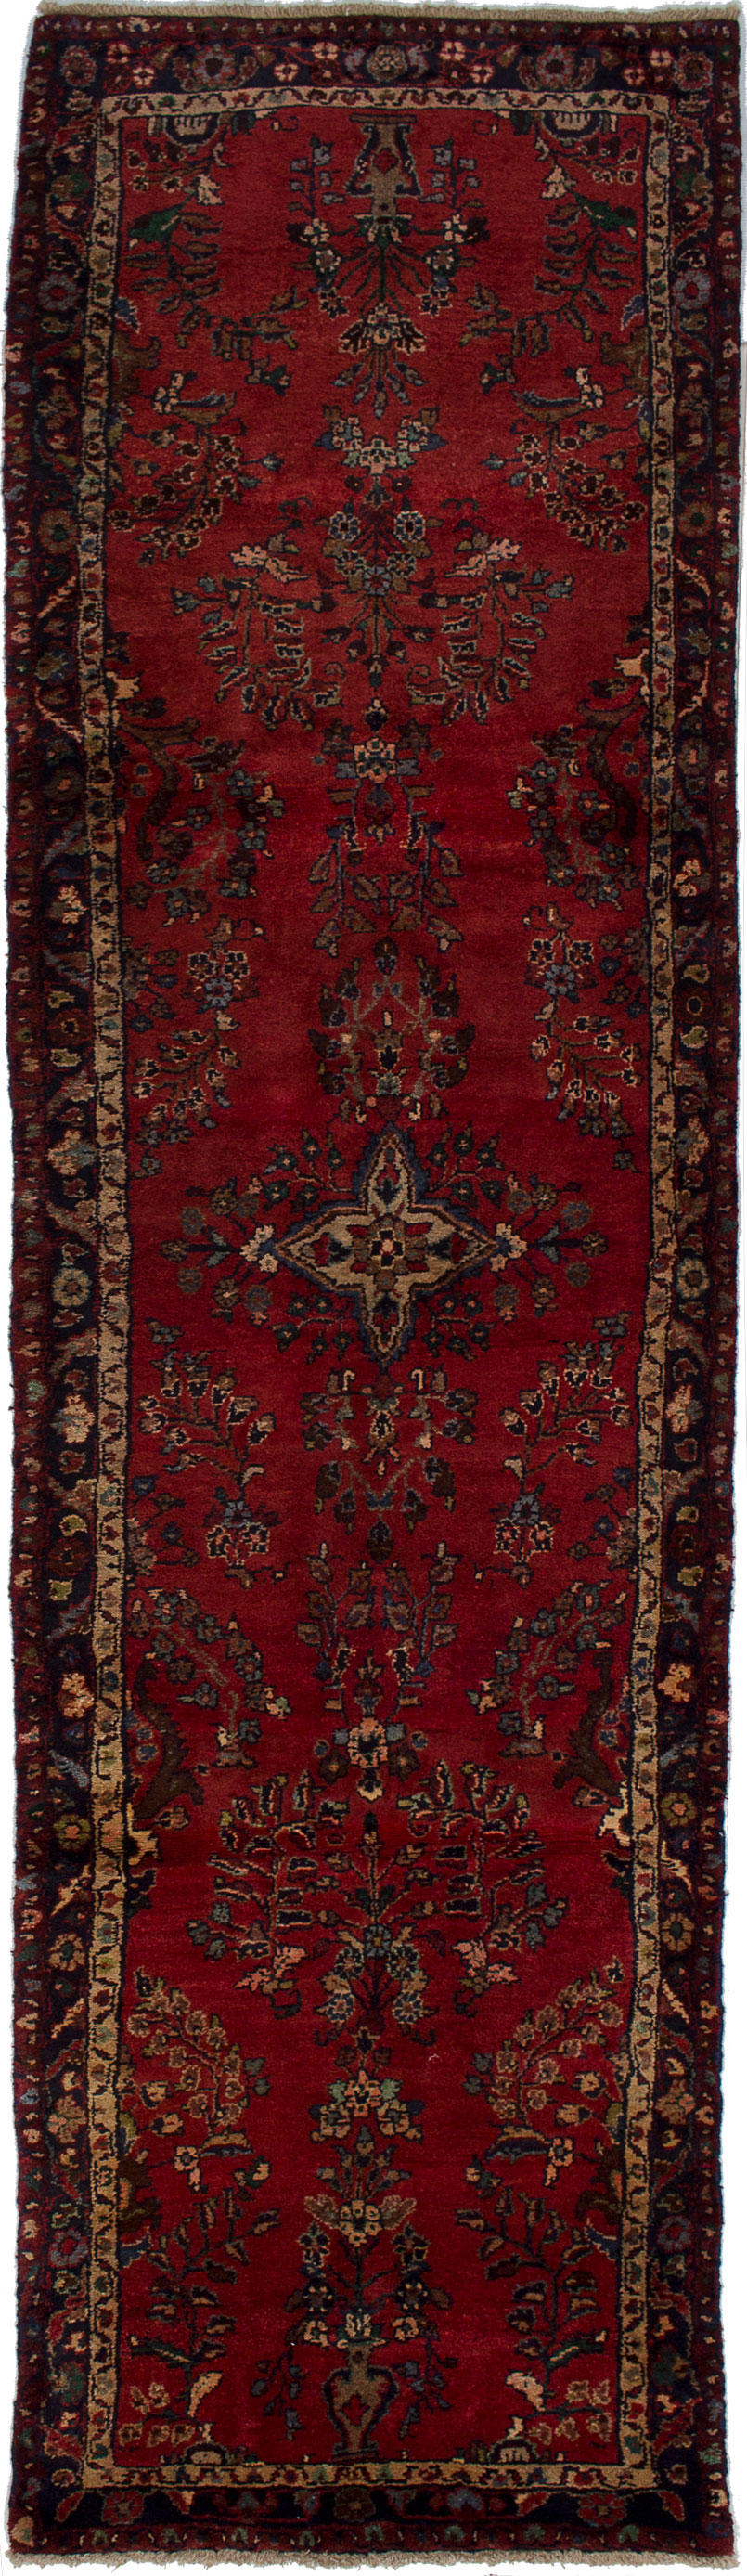 Hand-knotted Hamadan Red Wool Rug 2'10" x 10'5" Size: 2'10" x 10'5"  